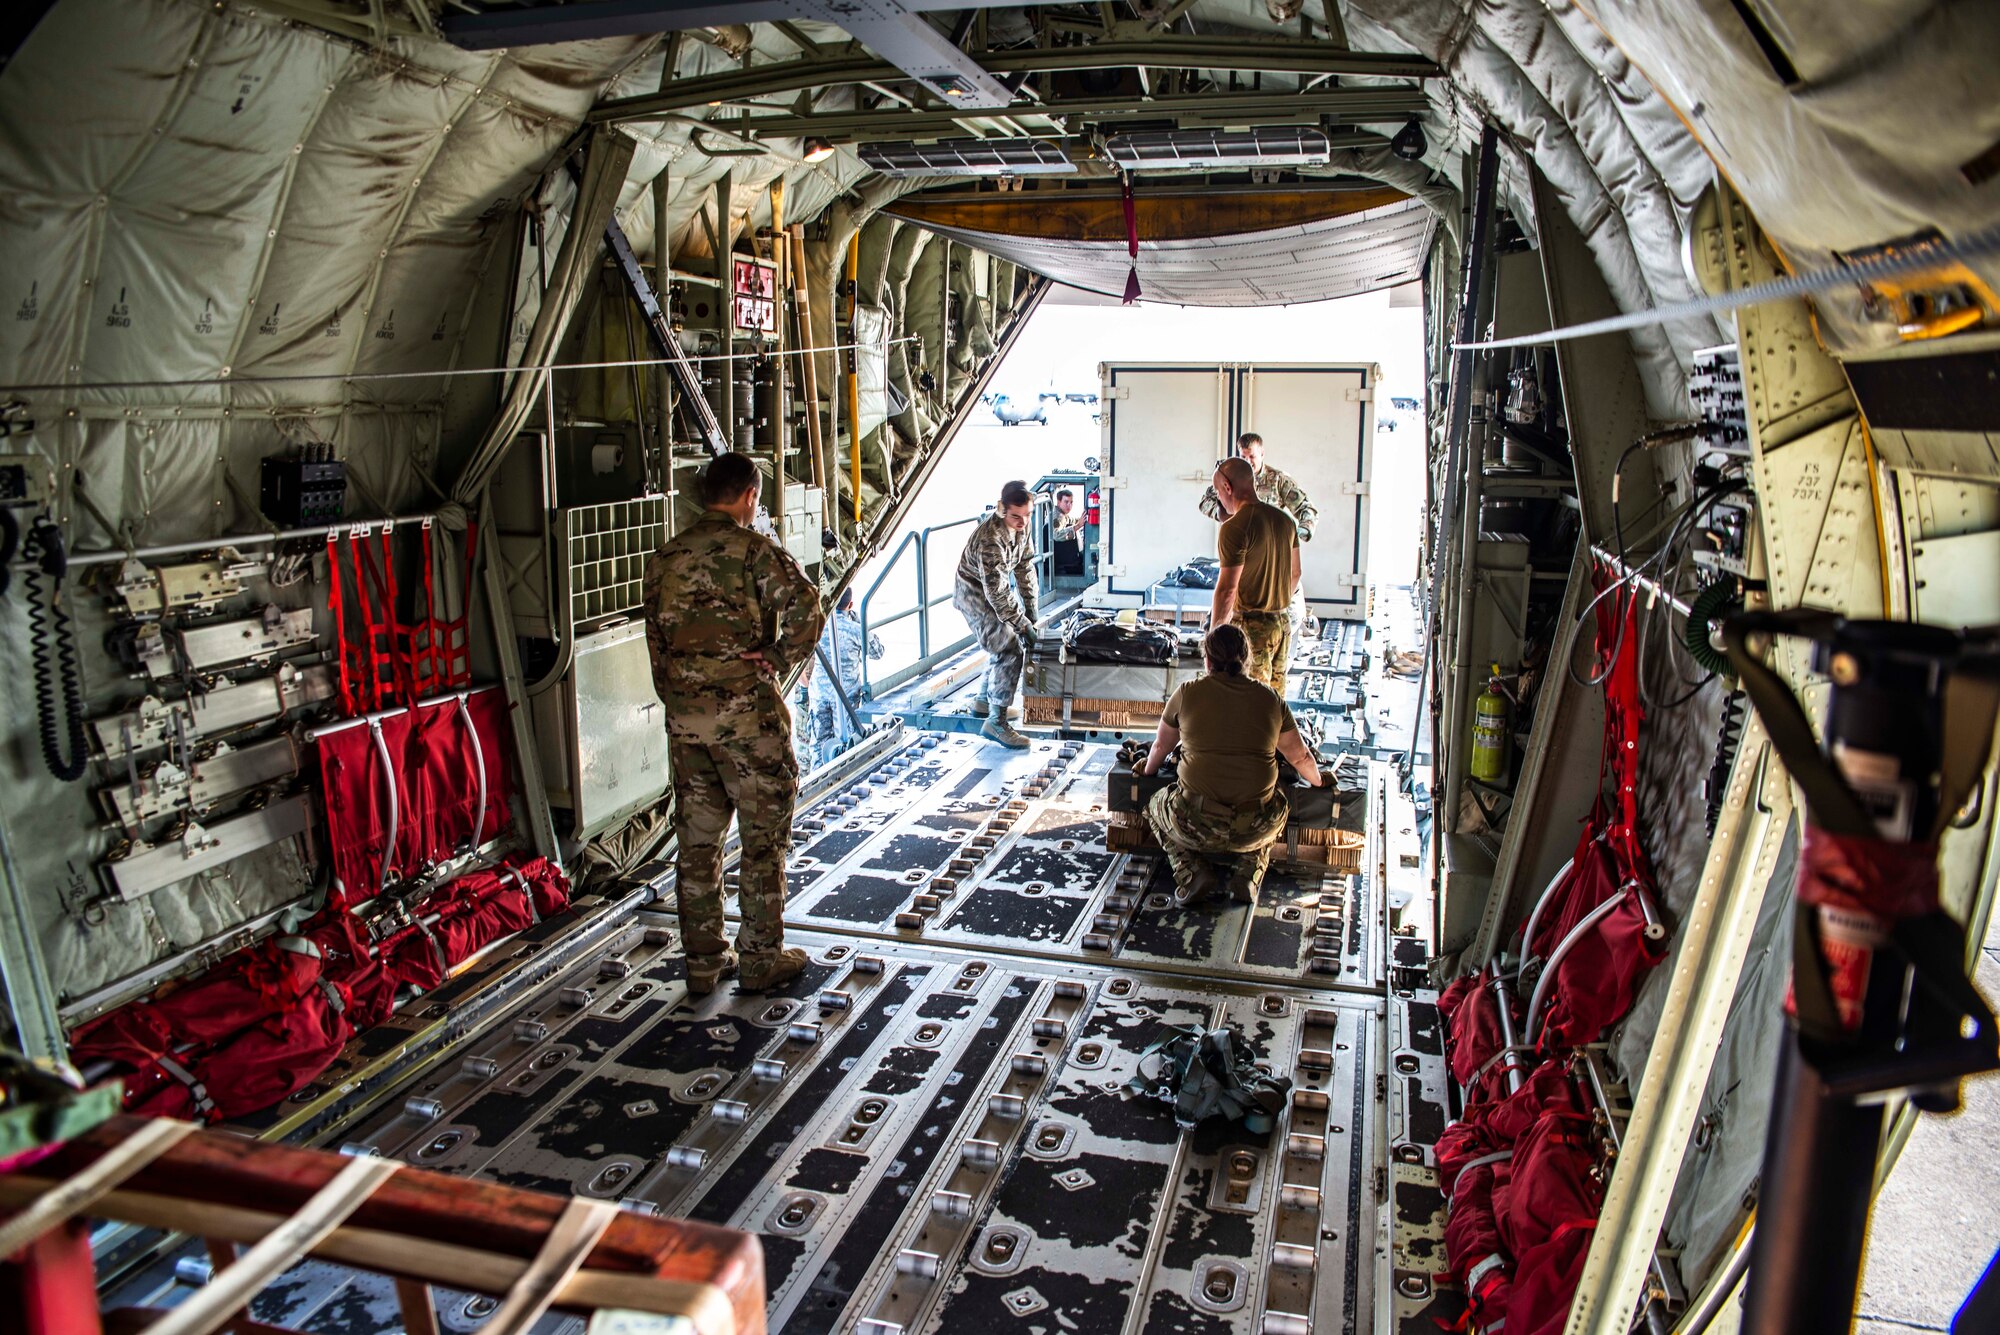 327th Airlift Squadron loadmasters assist in loading a C-130J Hercules before a low altitude training flight on October 5, 2019 at Little Rock Air Force Base, Ark. This training exercise provides aircrew the opportunity to experience multiple types of airdrops and drop zones while instilling tactical techniques and procedures for mobility operations. The robust and detailed training scenario allowed aircrew and air transportation specialists to operate in austere conditions, simulating enemies with an array of capabilities. (U.S. Air Force Reserve photo by Senior Airman Chase Cannon)